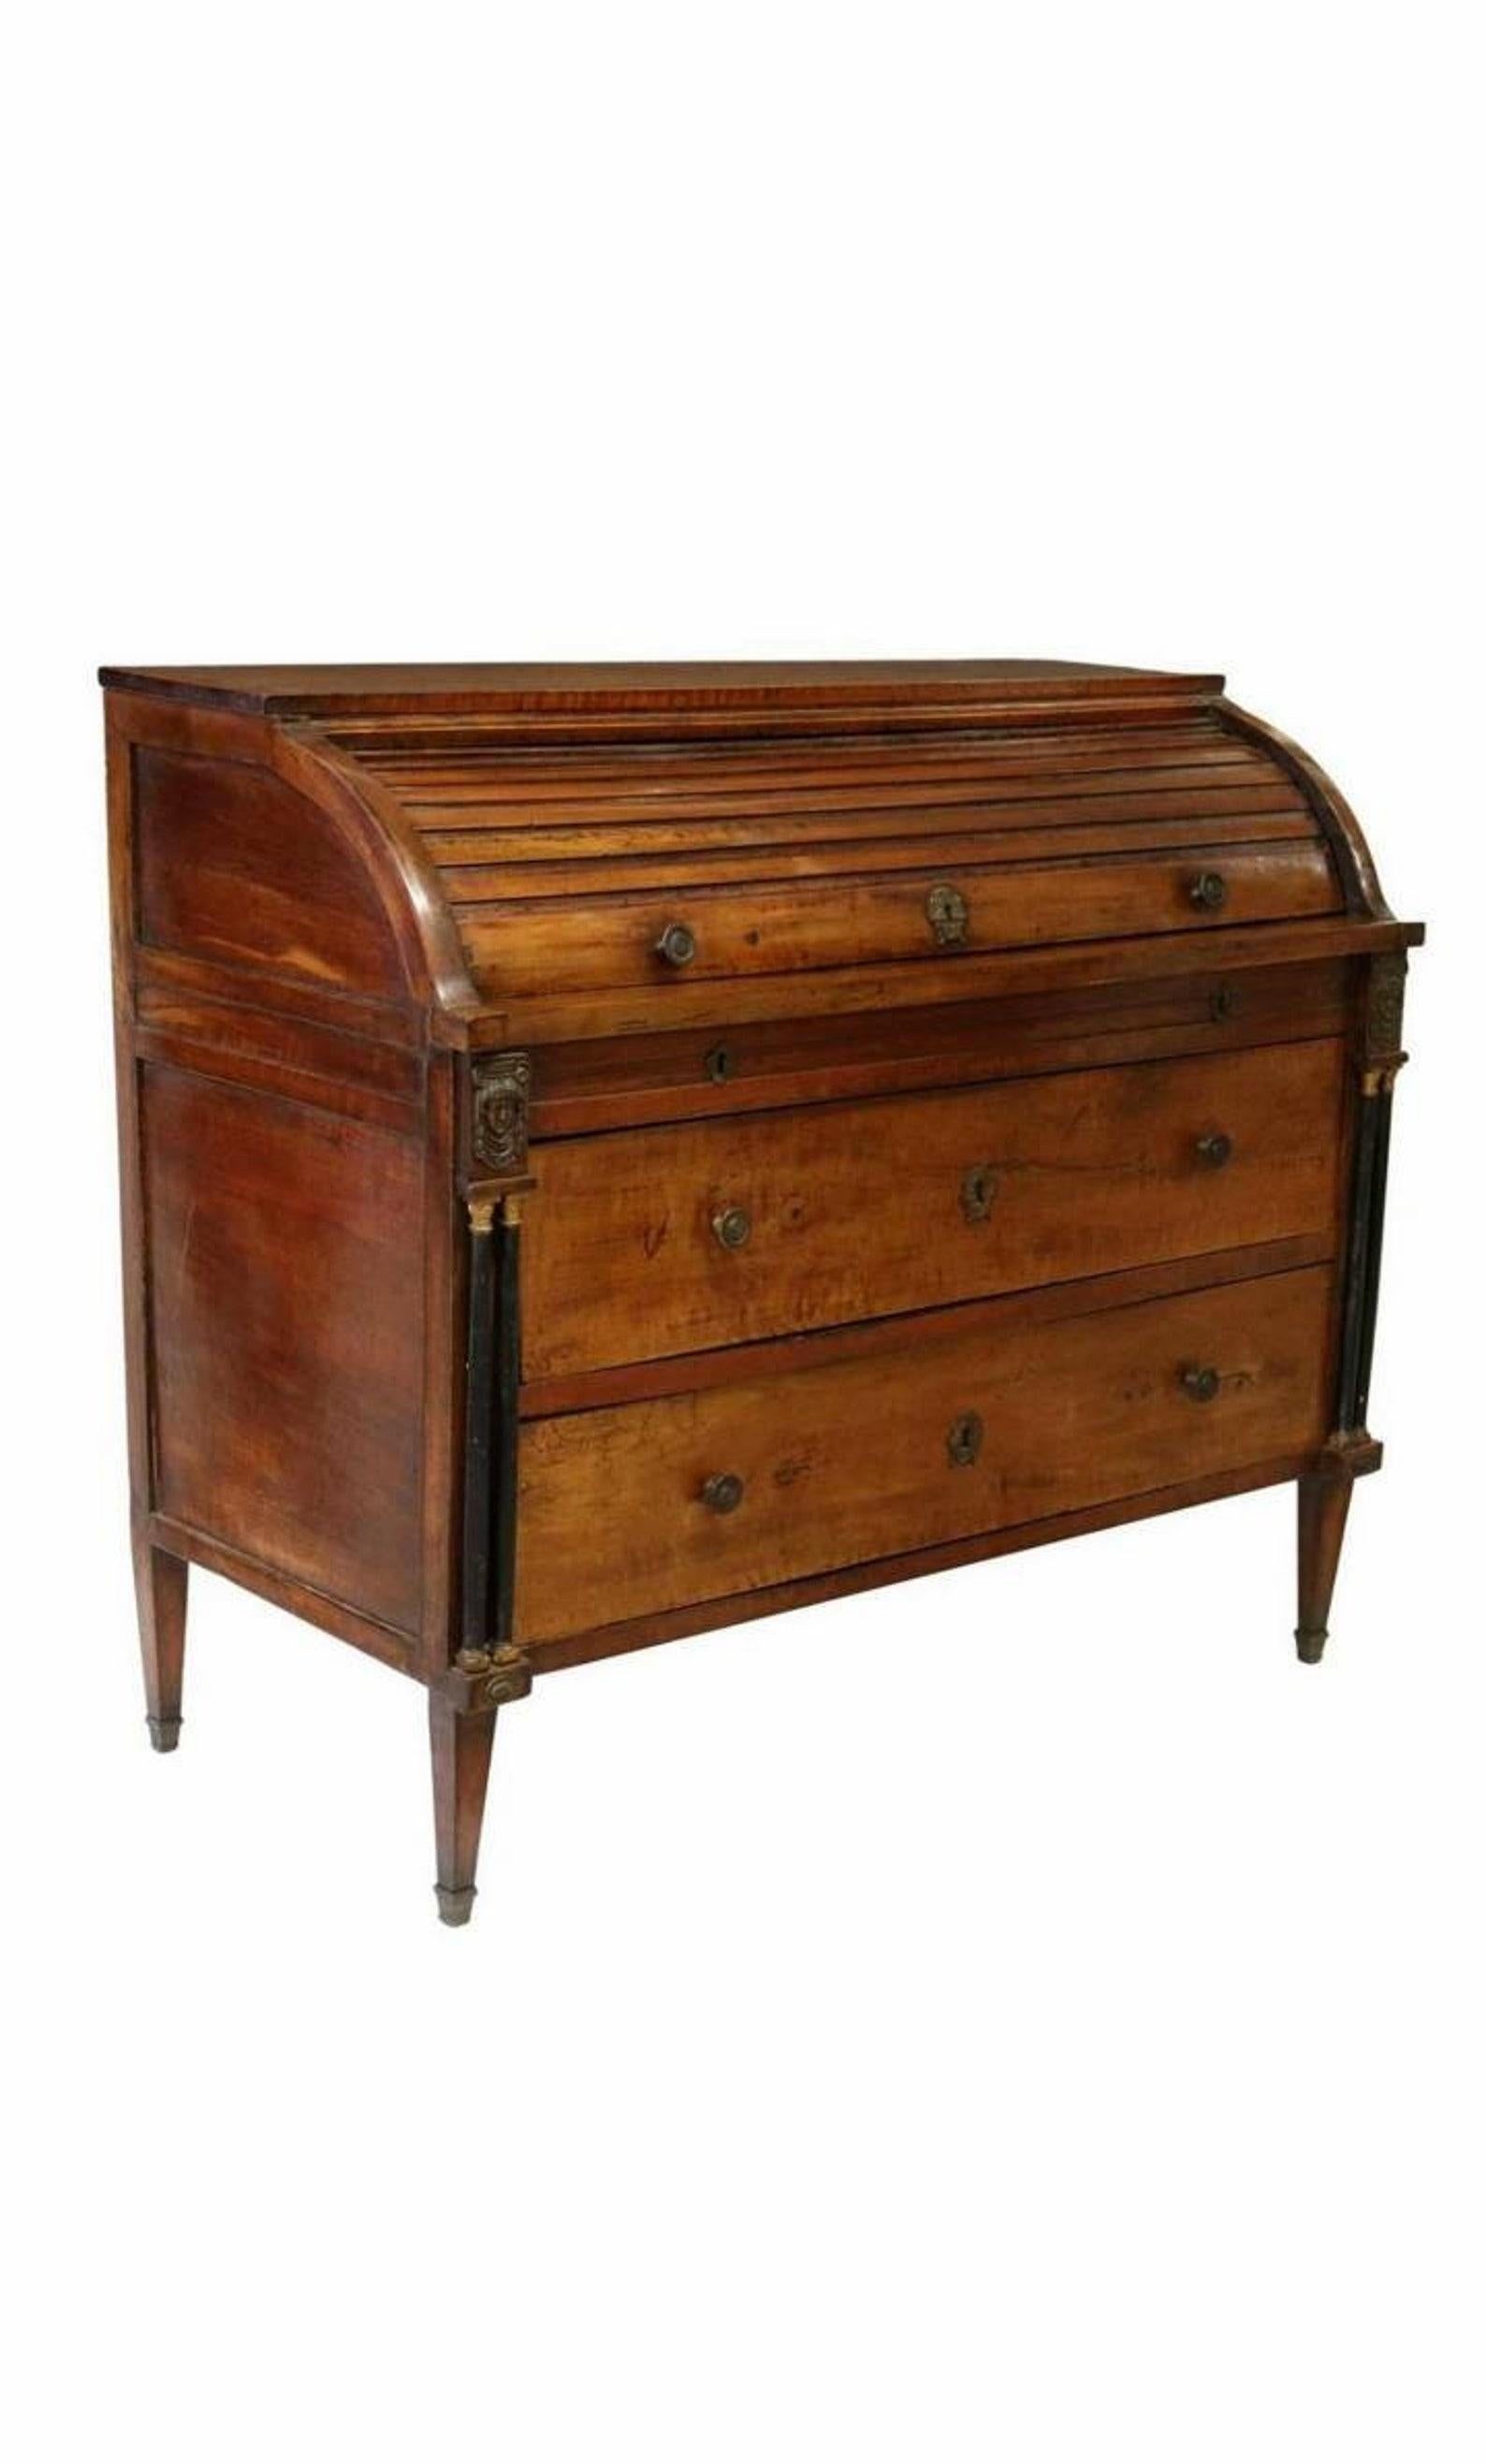 A exceptionally rare Period French Empire (1804-1814) walnut bureau a cylindre. 

Exquisitely hand-crafted in France, most likely Parisian work, dating to the early 19th century, the large antique cylinder desk features a tambour roll top, opening